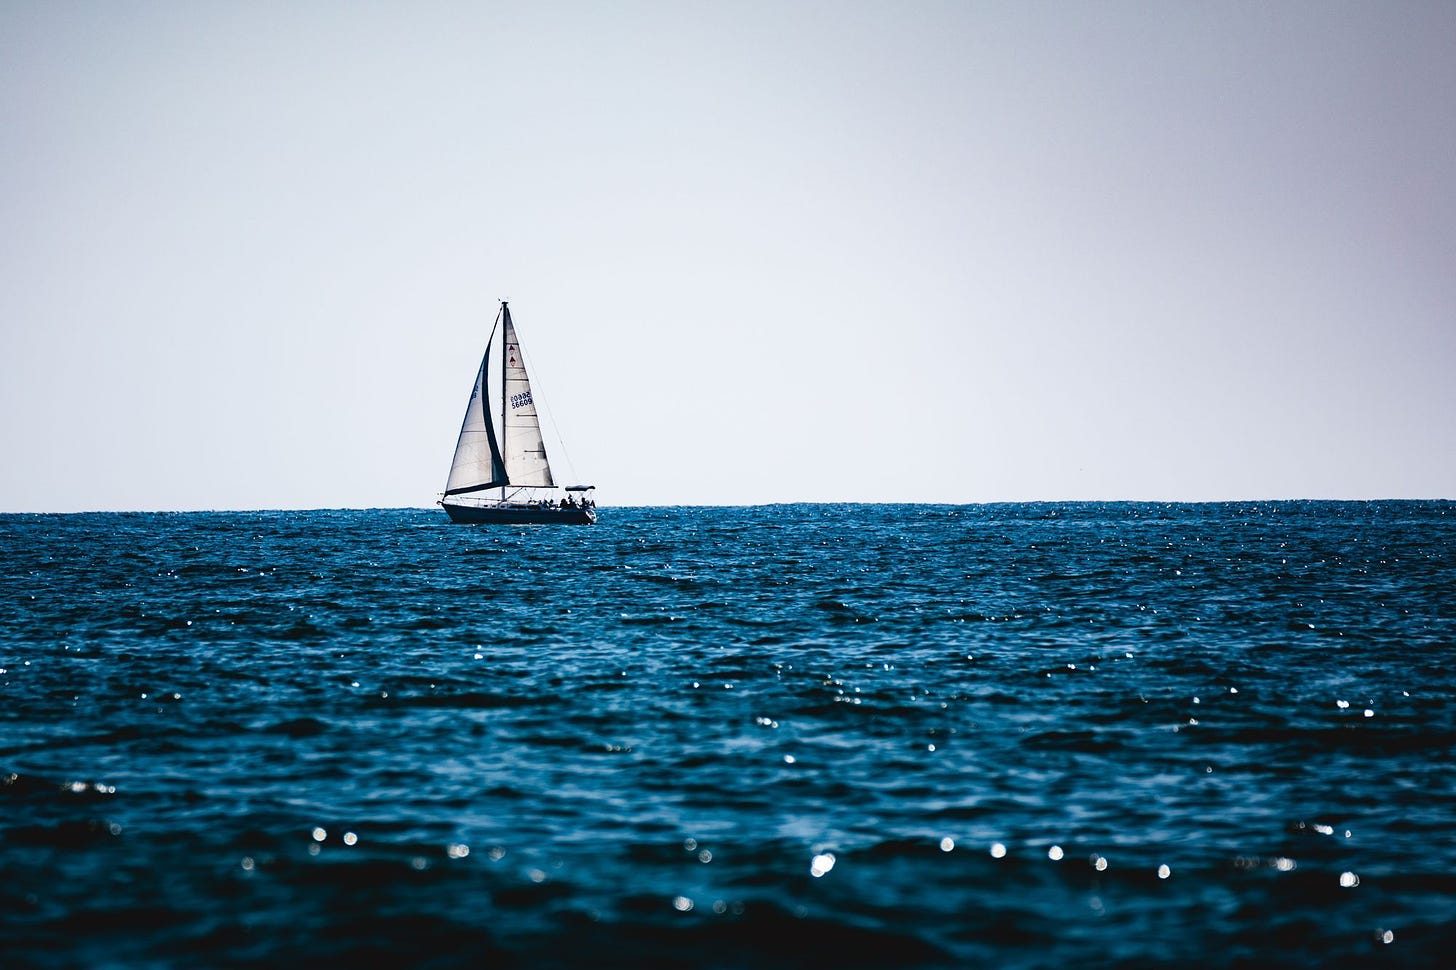 Photo of sailboat by Sides Imagery from Pexels